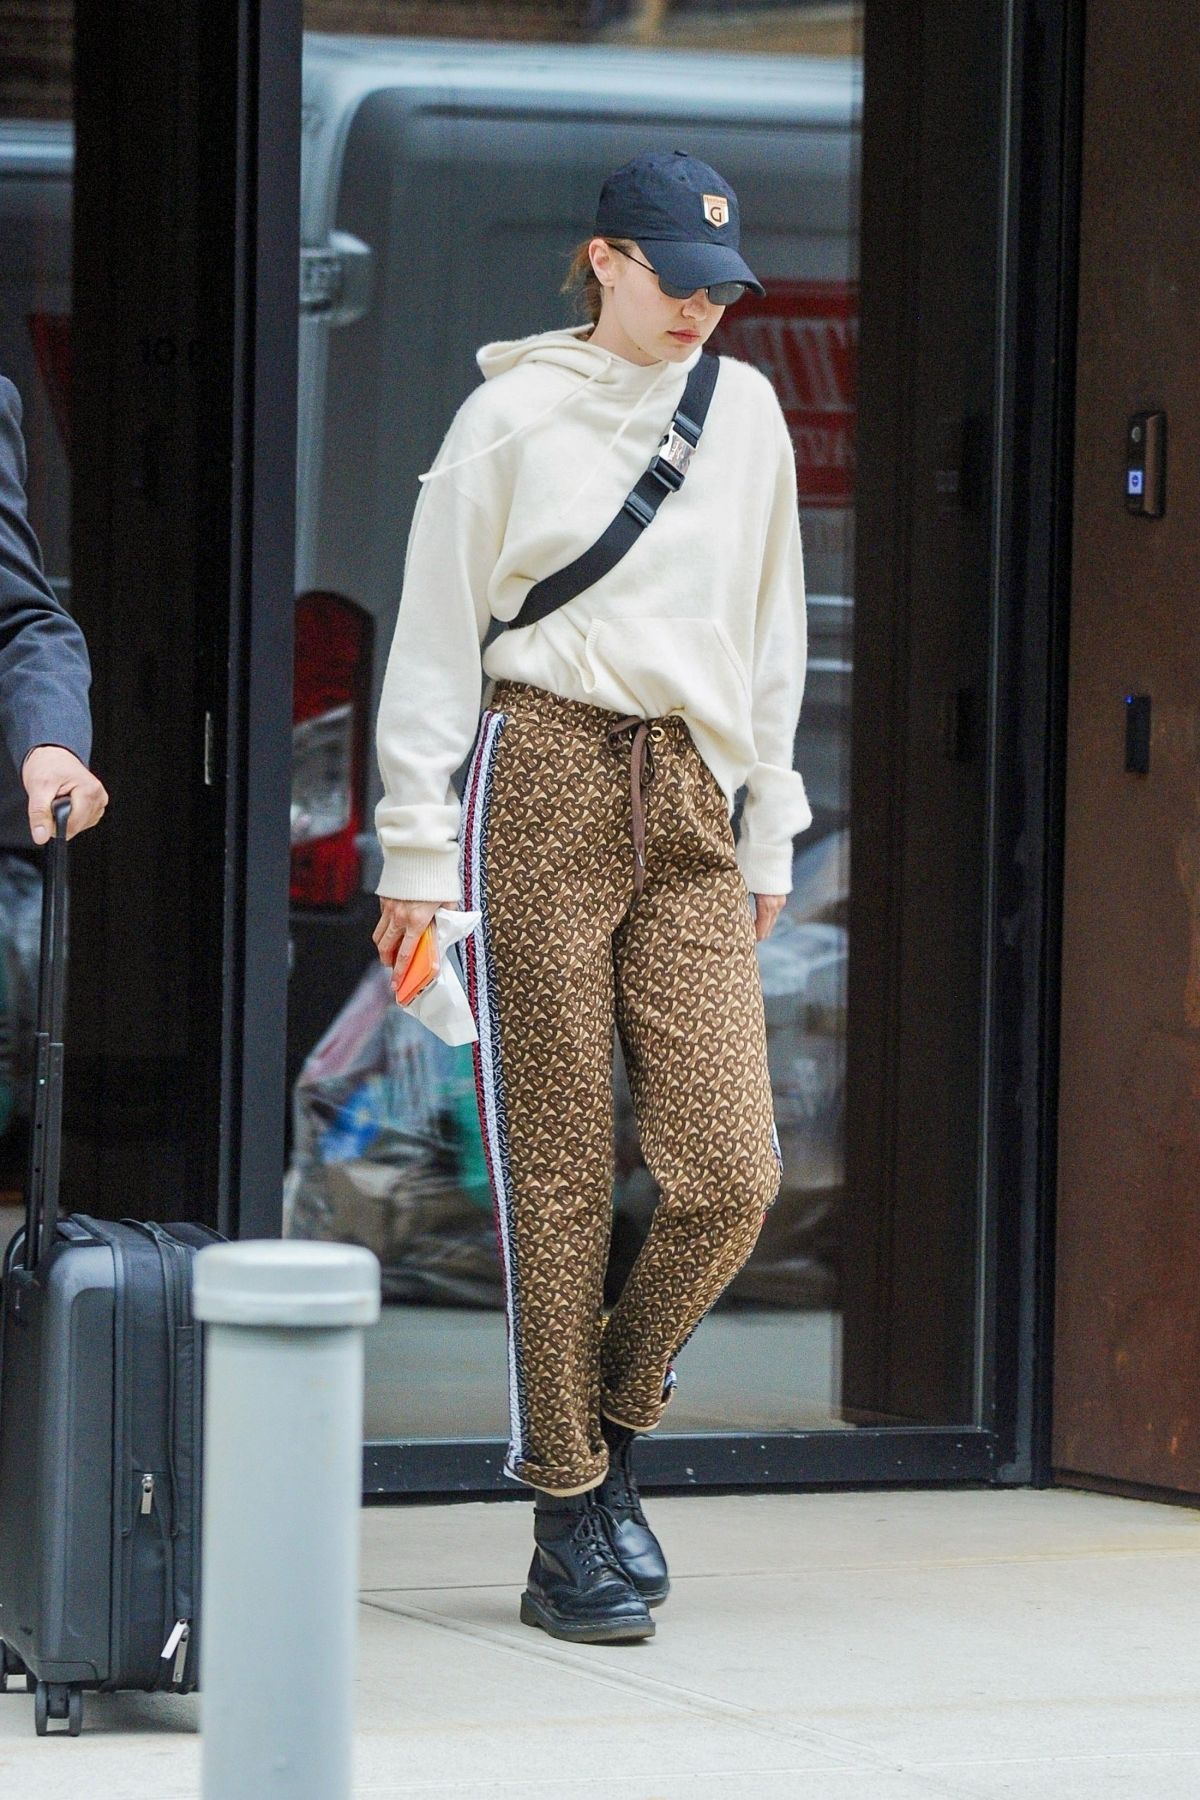 GIGI HADID in a Burberry Pants Out in New York 05/28/2019 – HawtCelebs